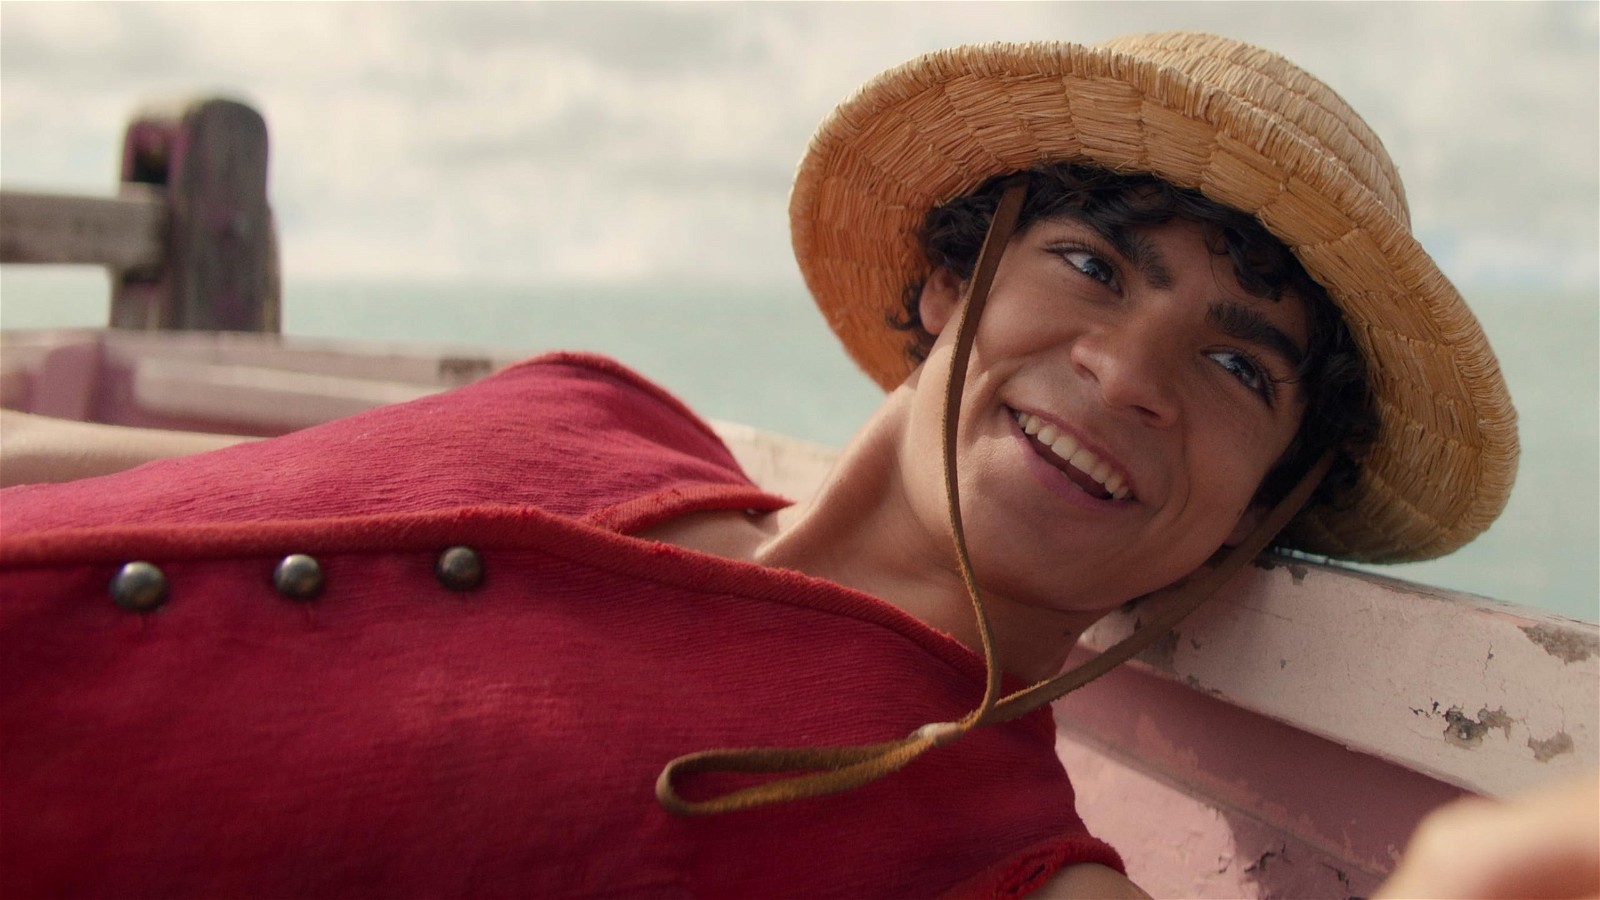 Inaki Godoy plays the role of Monkey D. Luffy | A still from the series